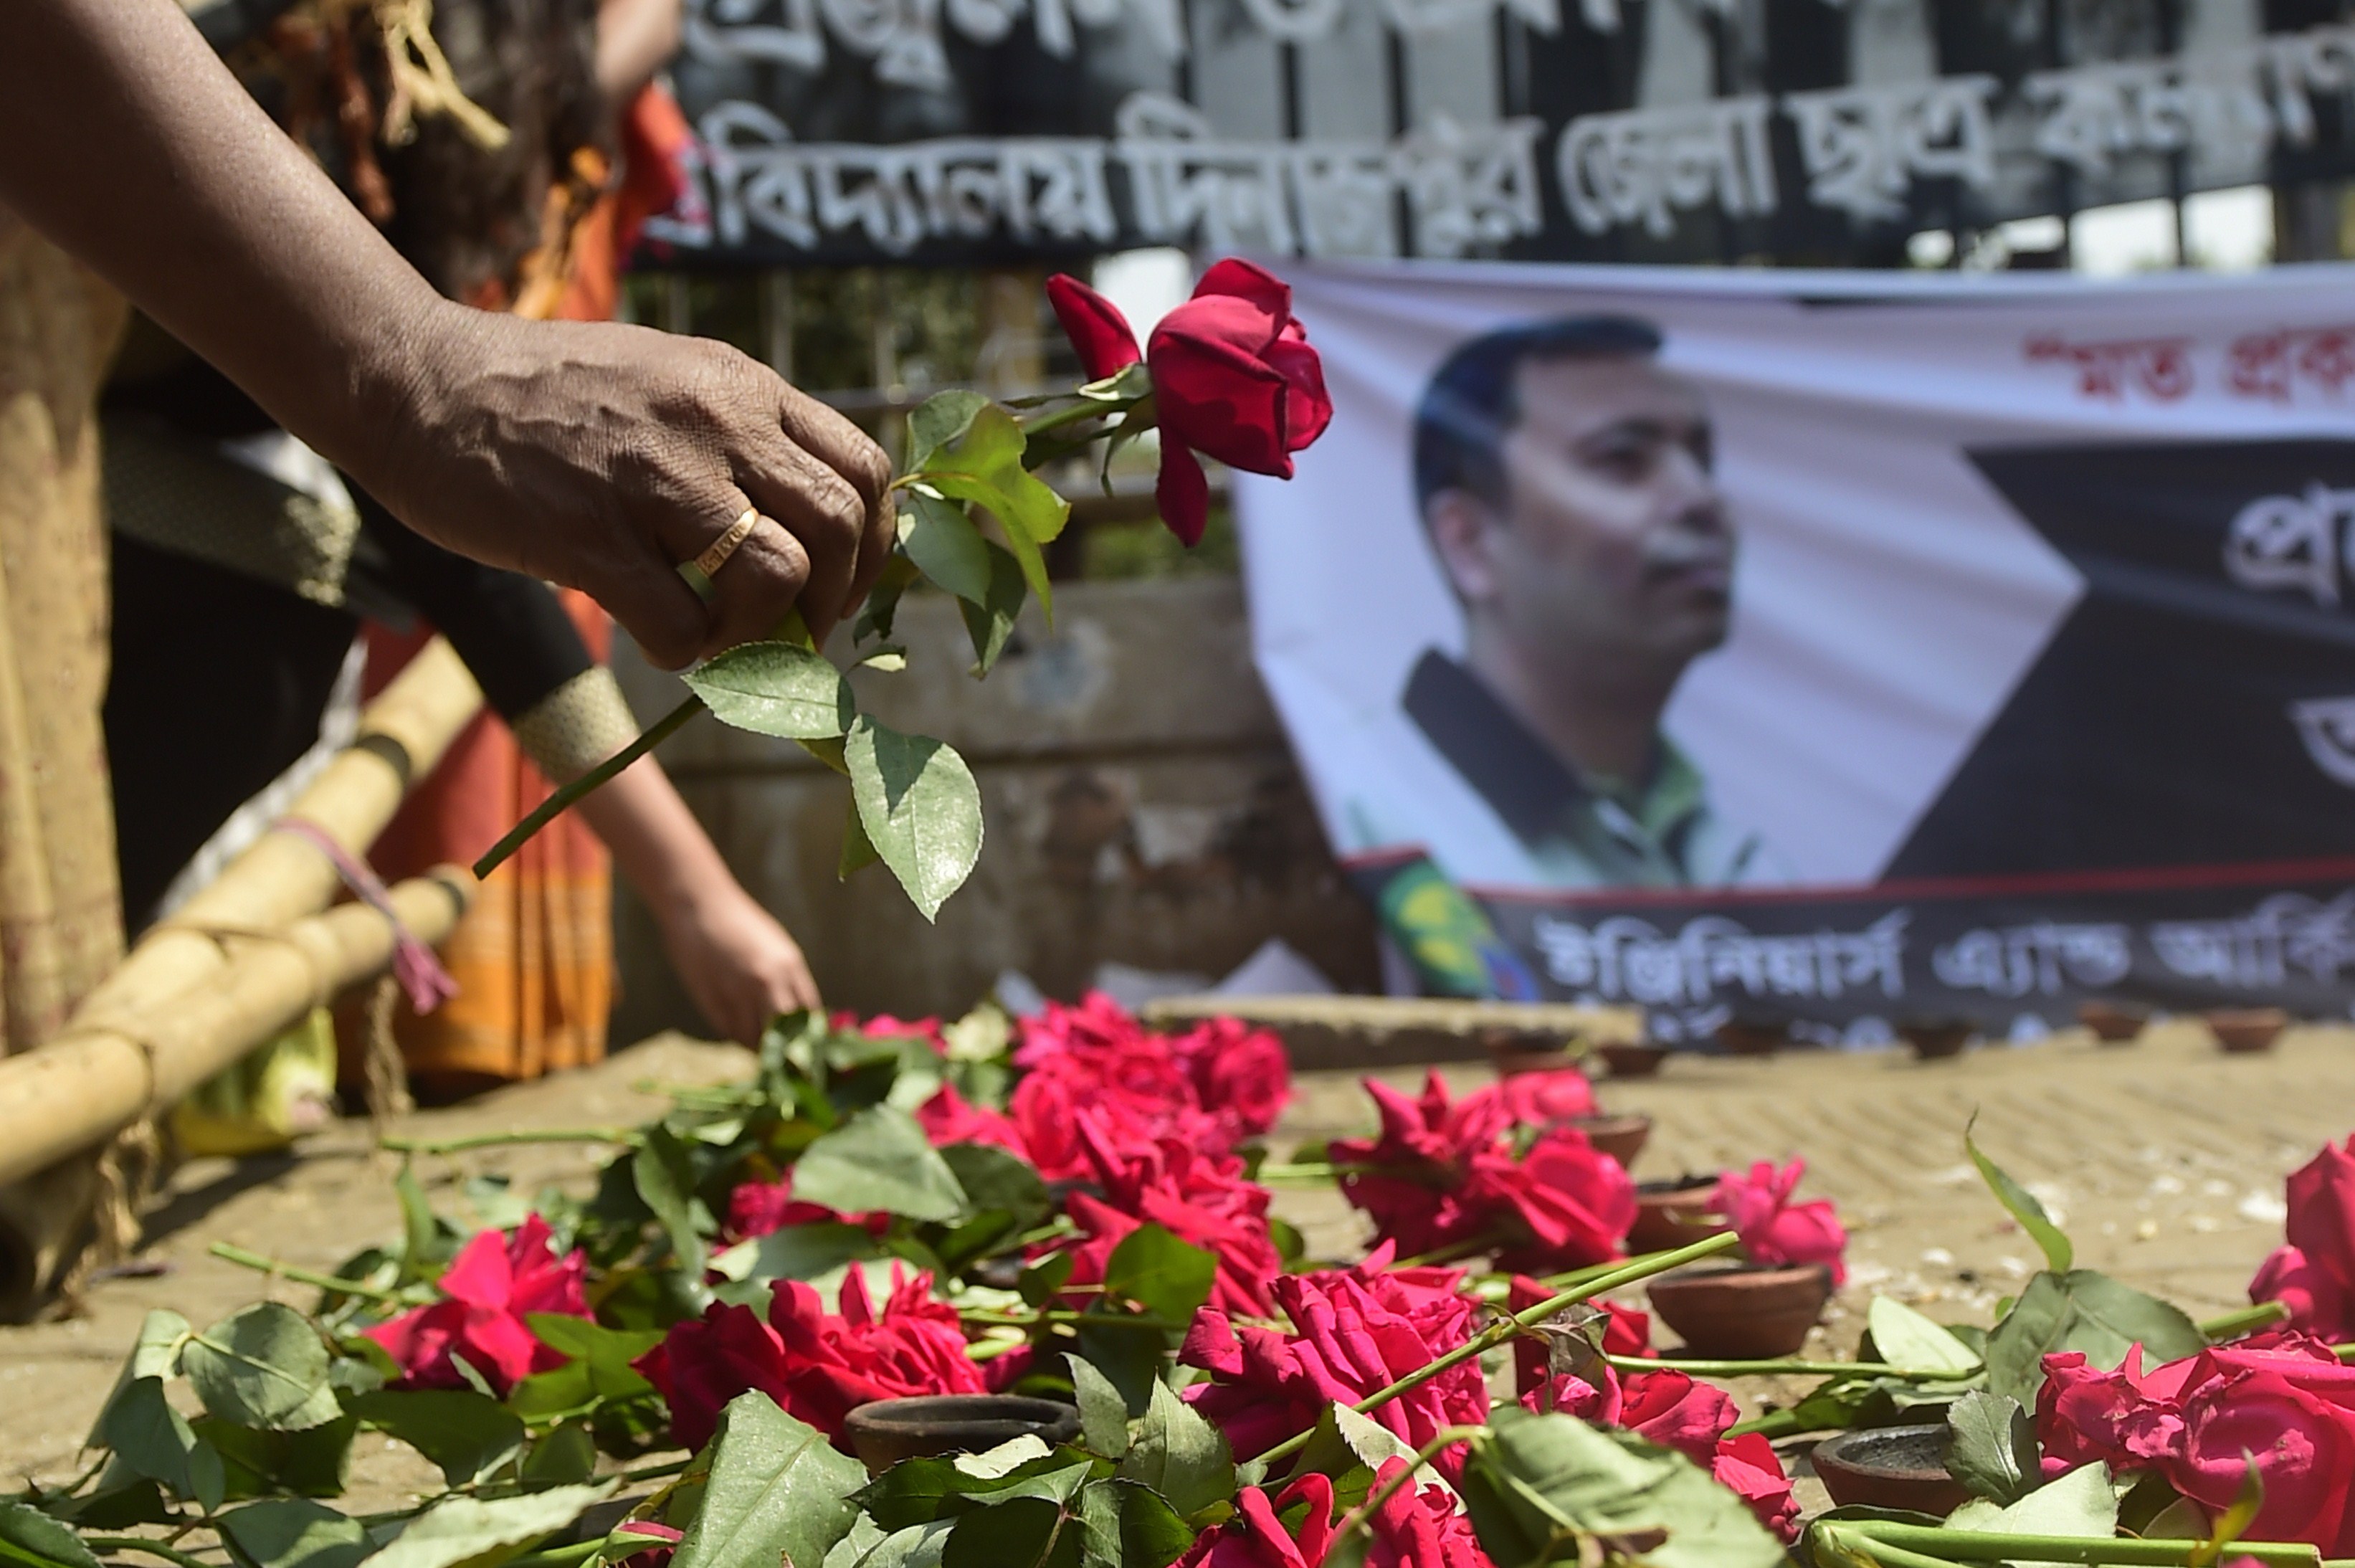 A Bangladeshi social activist pays his  last respects to slain US blogger of Bangladeshi origin and founder of the Mukto-Mona (Free-mind) blog site, Avijit Roy in Dhaka on March 6, 2015 after he was hacked to death by unidentified assailants in the Bangladeshi capital on February 26. (MUNIR UZ ZAMAN—AFP/Getty Images)